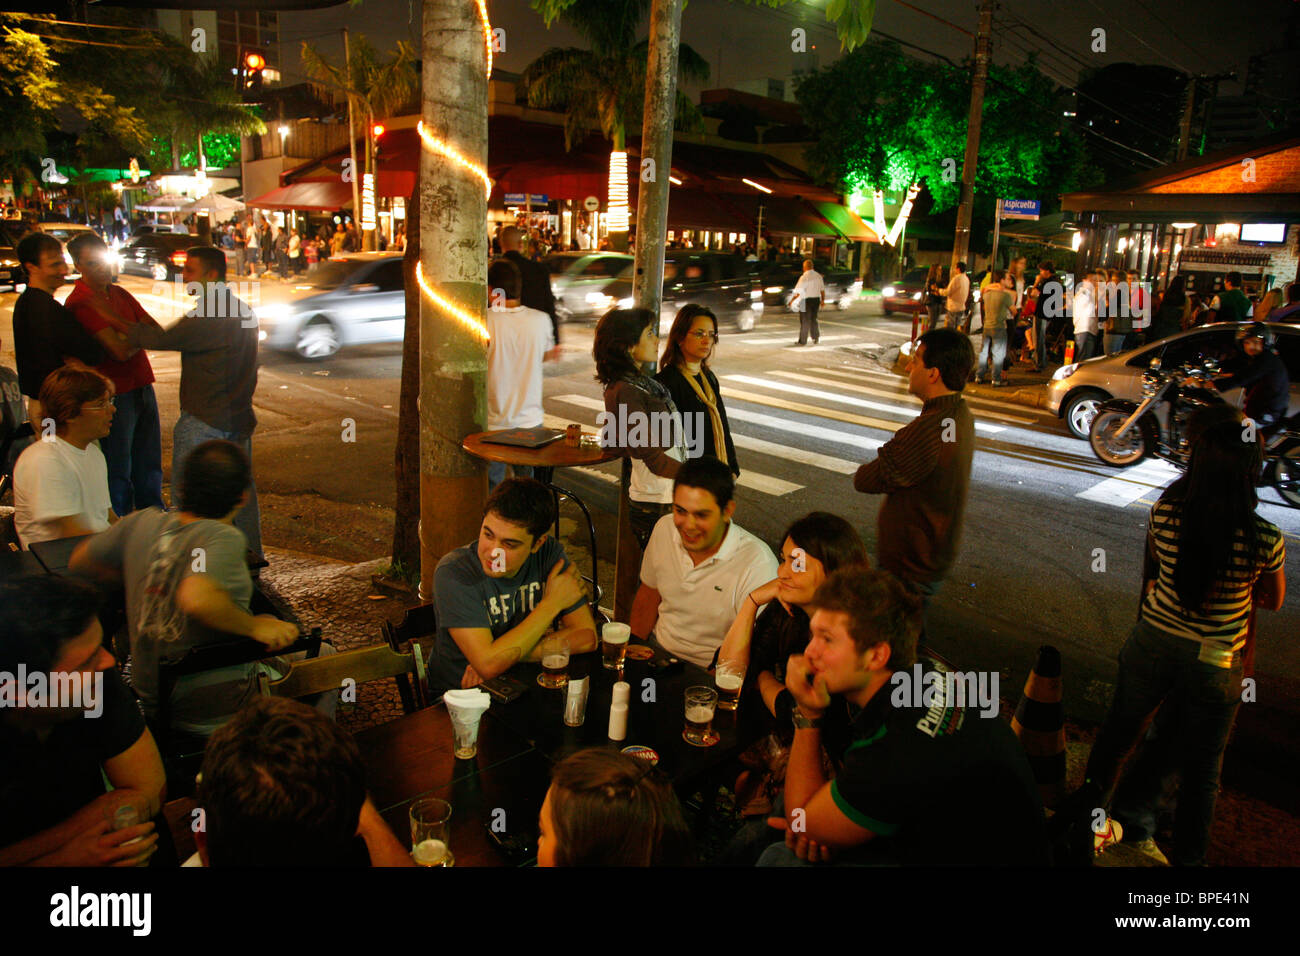 People at the Vila Madalena area known for its Bars restaurants and nighlife scenes. Sao Paulo, Brazil. Stock Photo